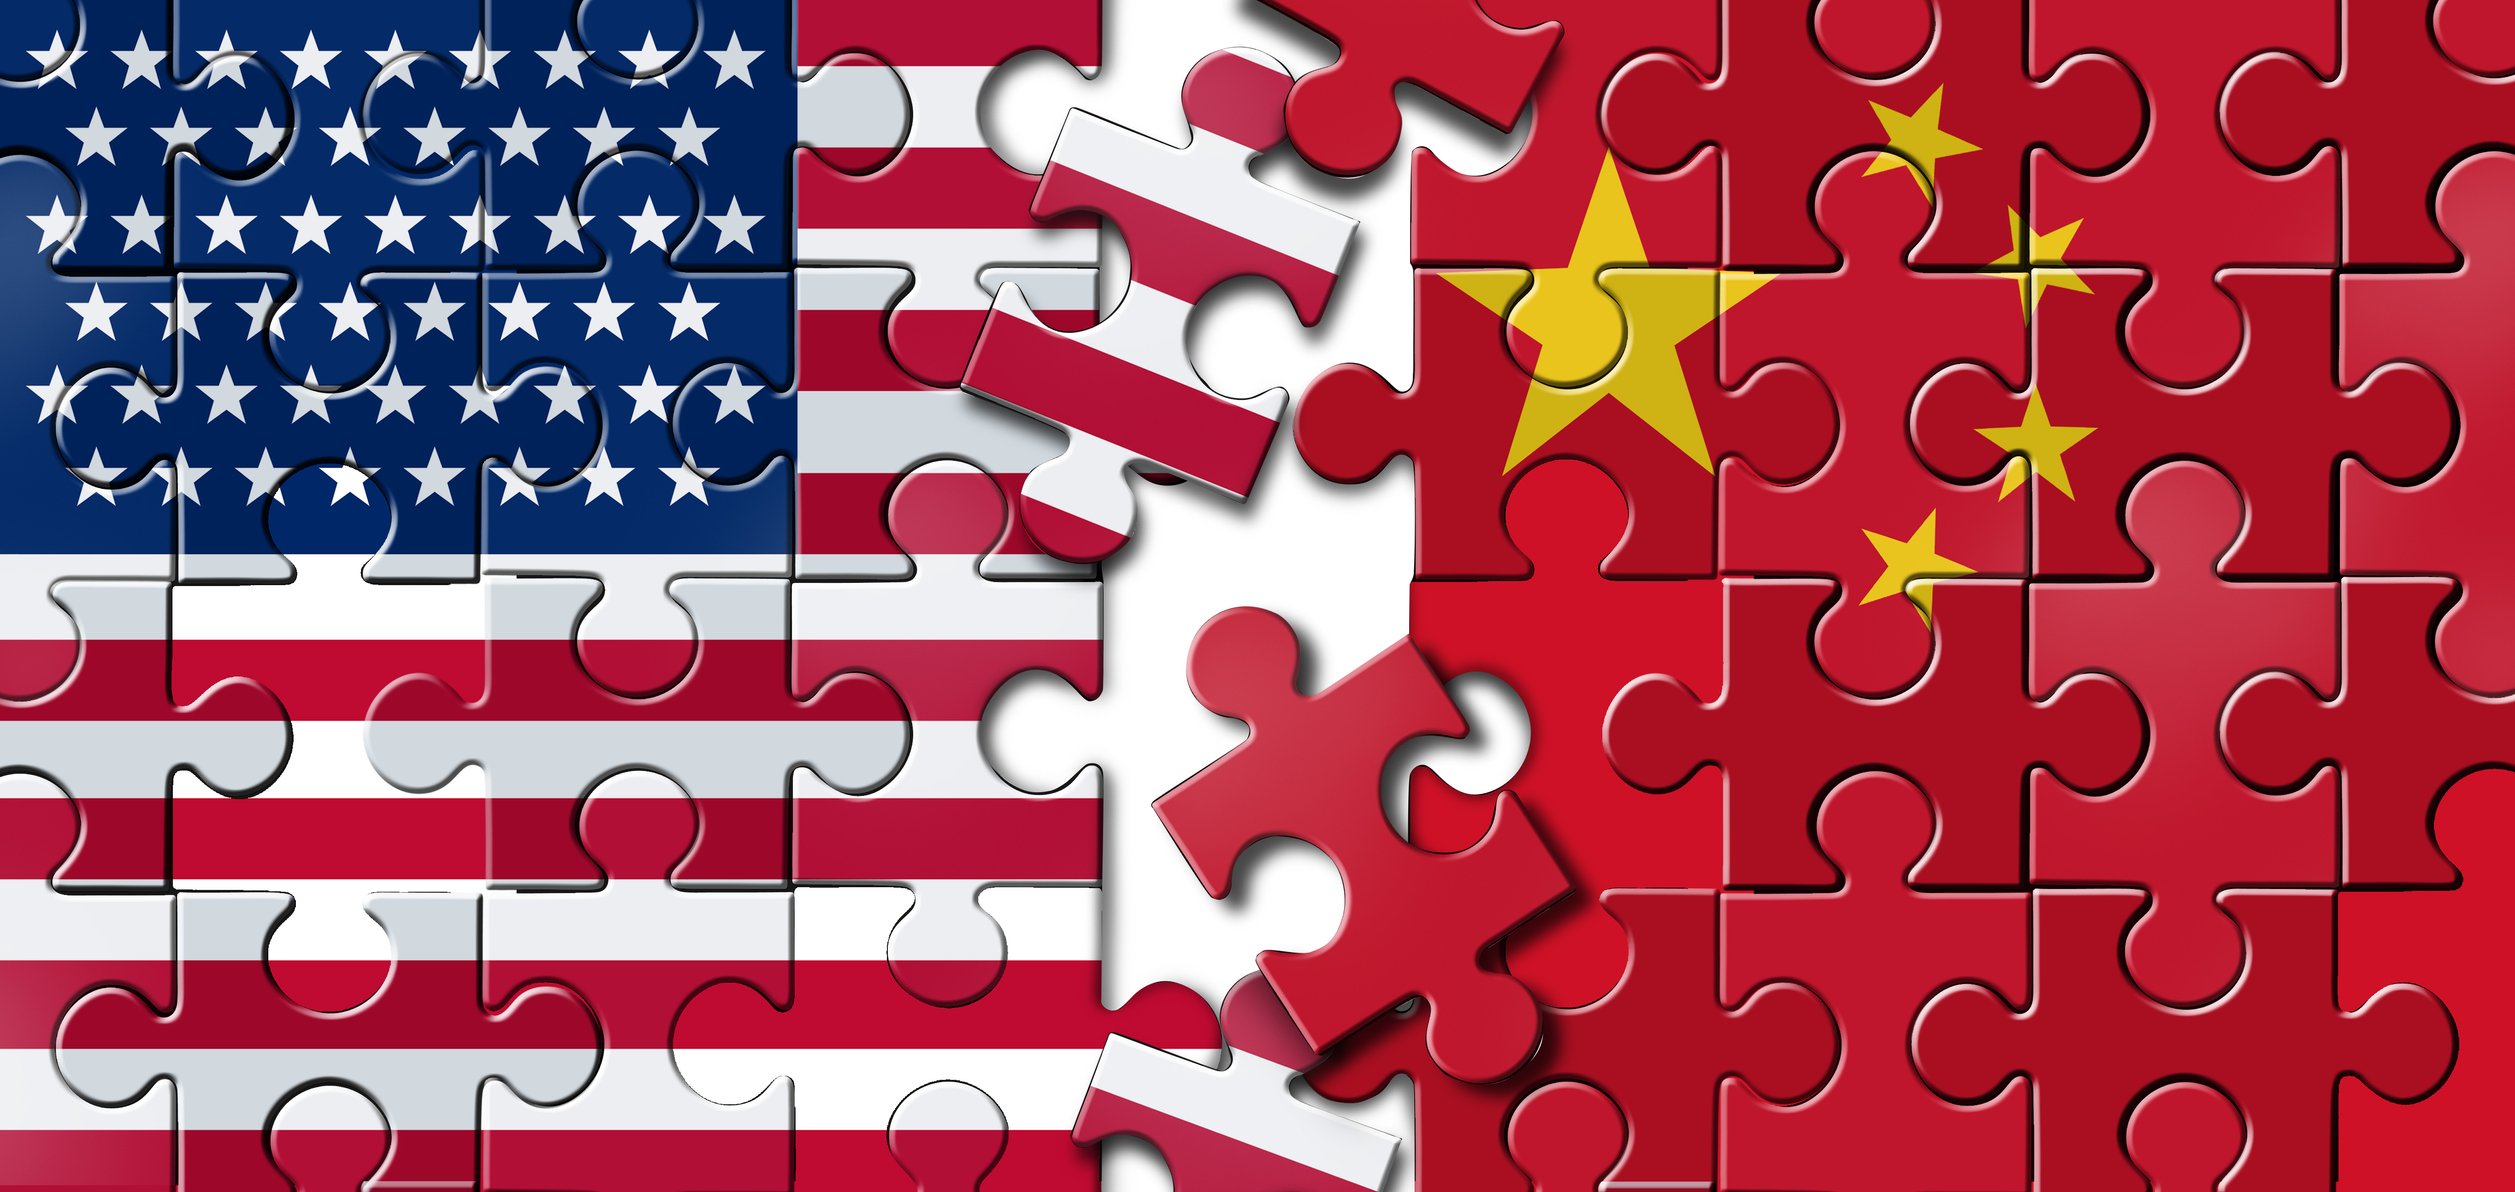 Graphic of a puzzle depicting both the US and Chinese flags with missing pieces bridging the two together